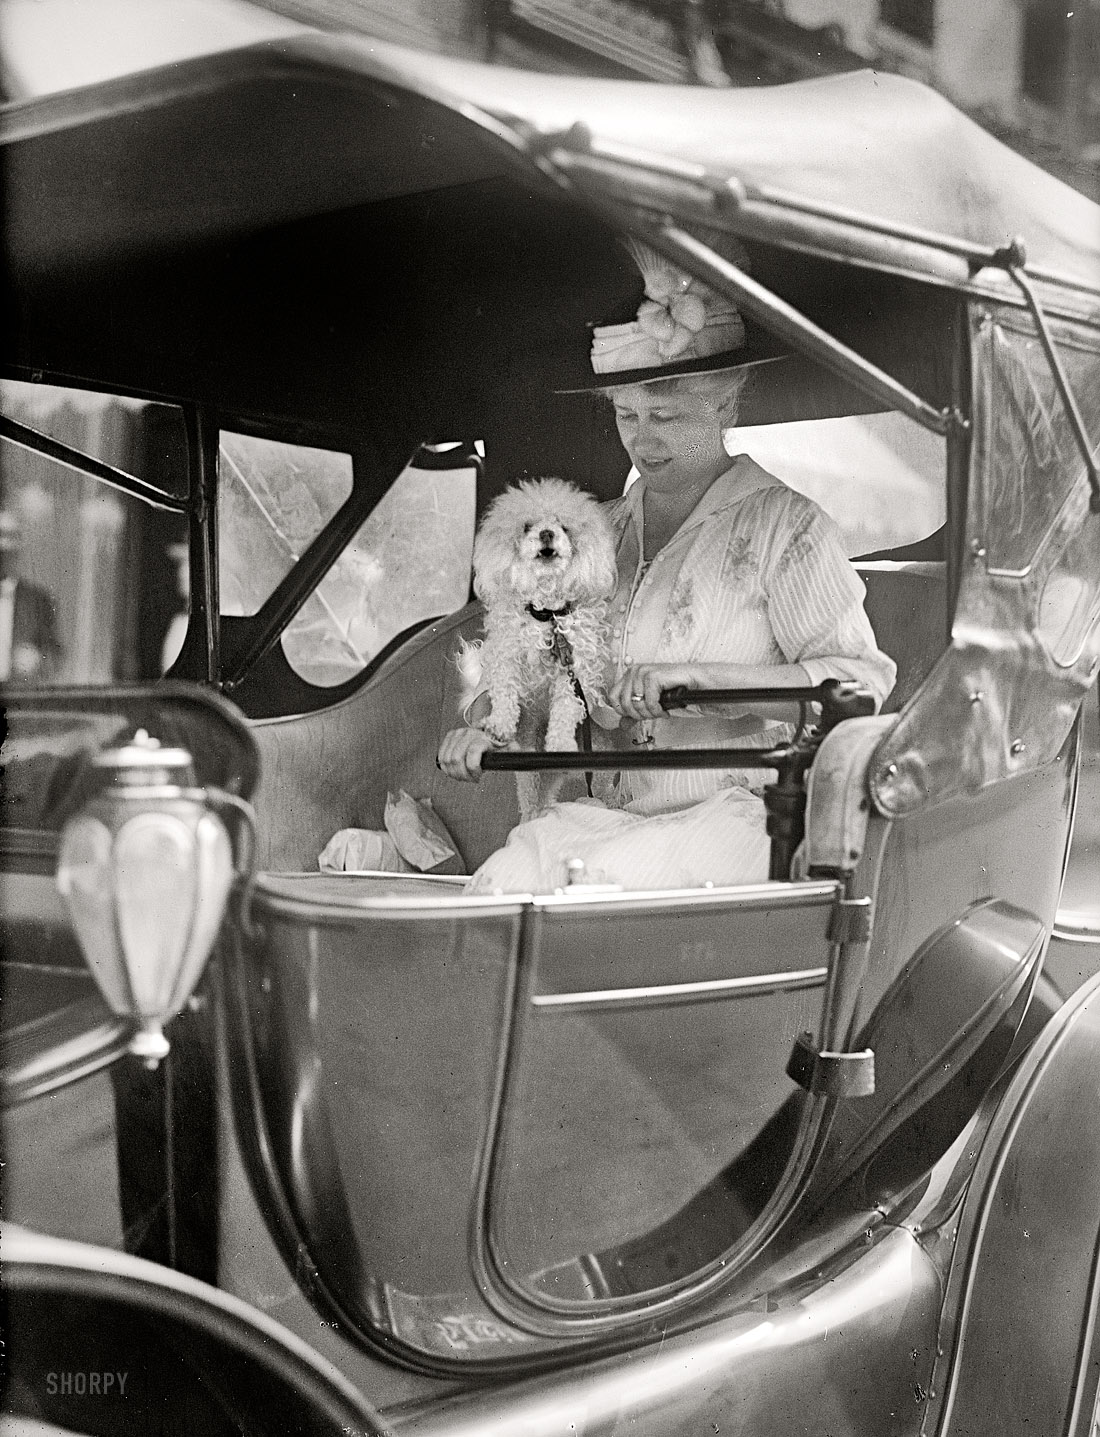 Washington, D.C., 1915. "Mrs. Robert Lansing in auto." Eleanor Foster Lansing, wife of Woodrow Wilson's new Secretary of State, with her poodle at the tiller of an electric car. Harris & Ewing Collection glass negative. View full size.